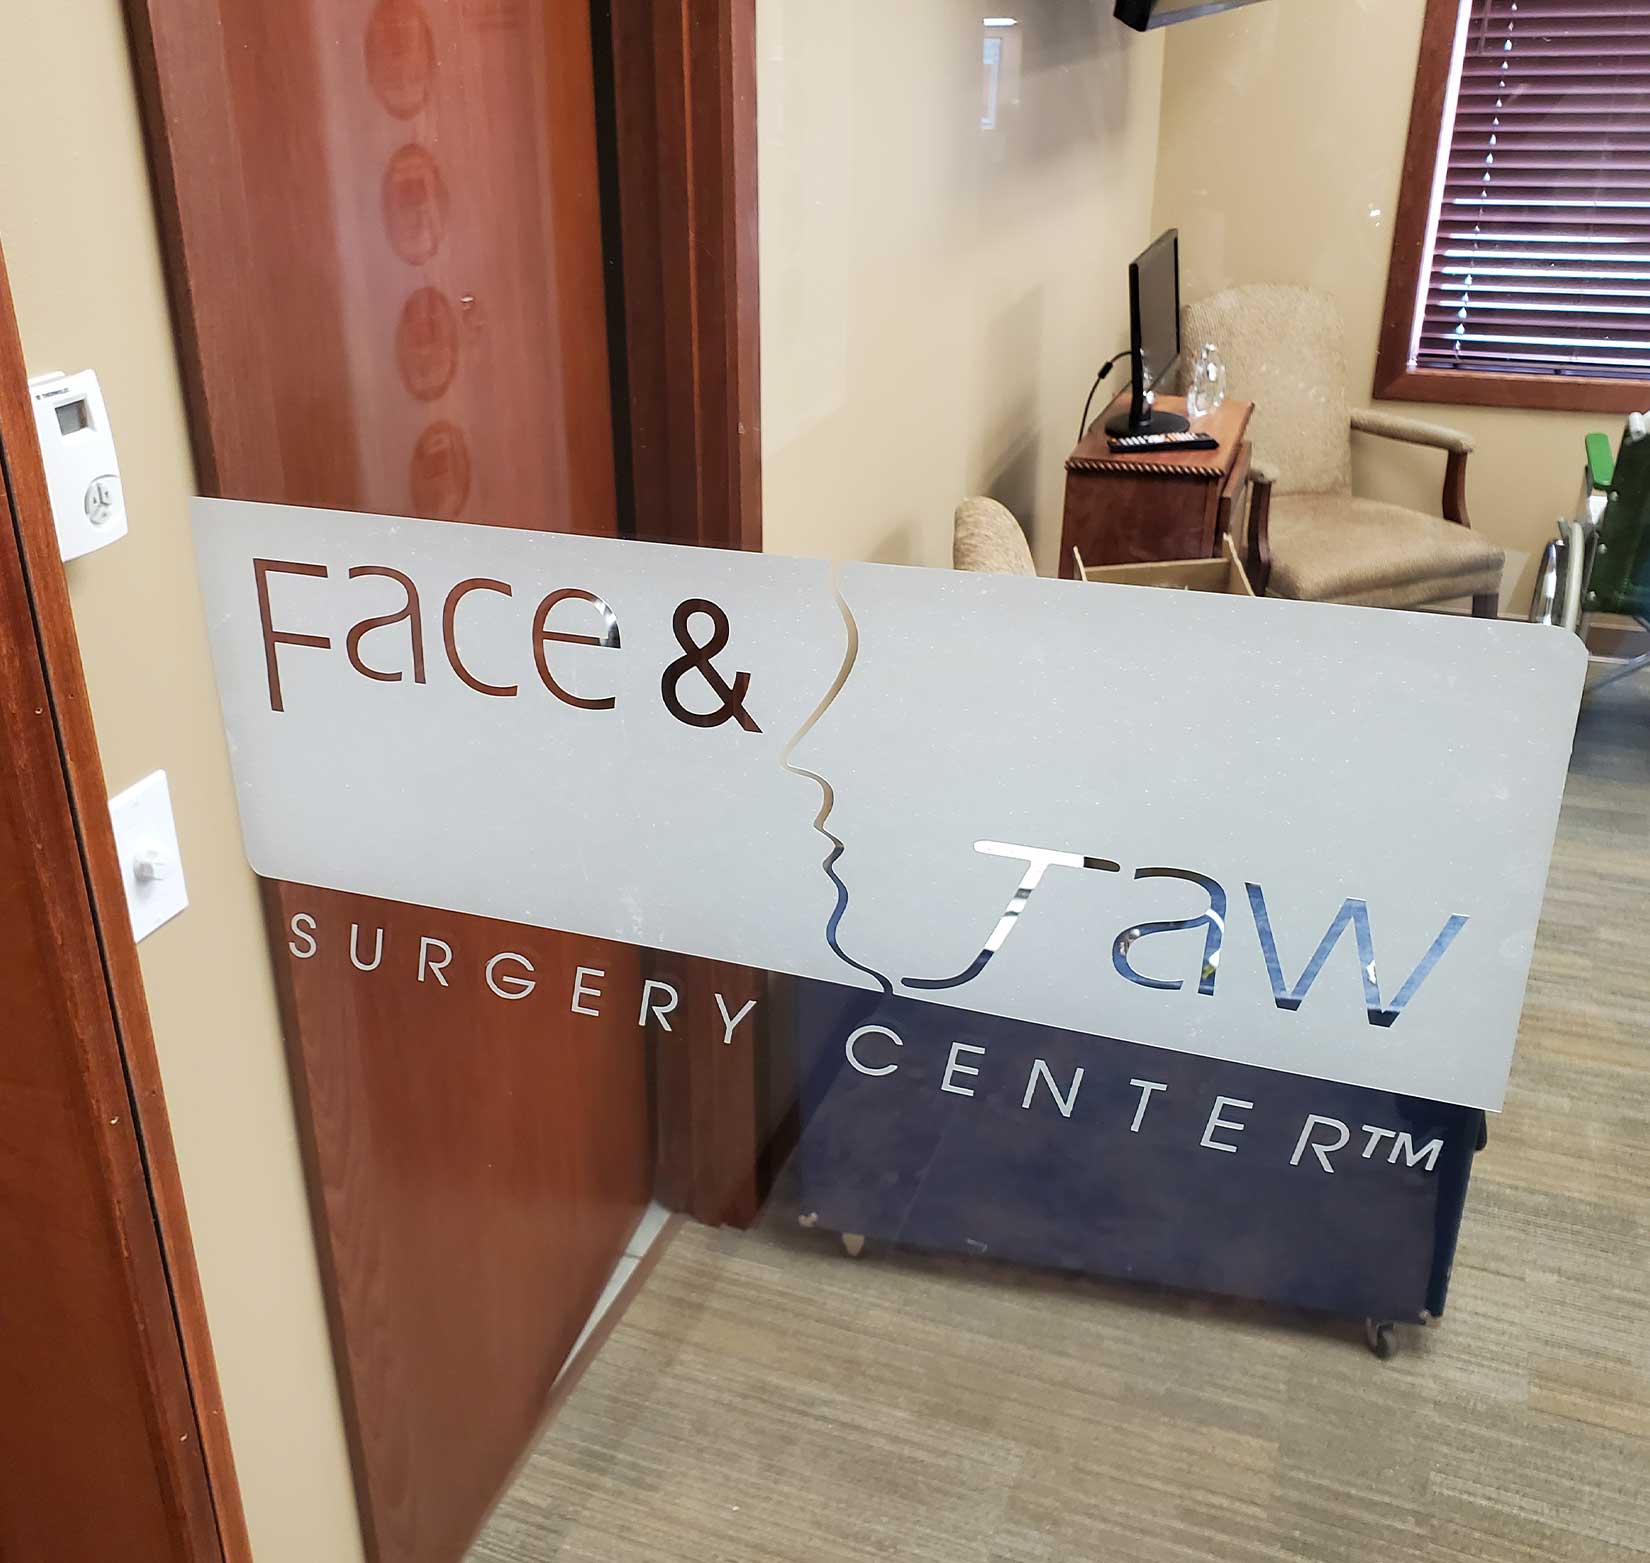 An interior window sign of the Face and Jaw Surgery Center’s logo